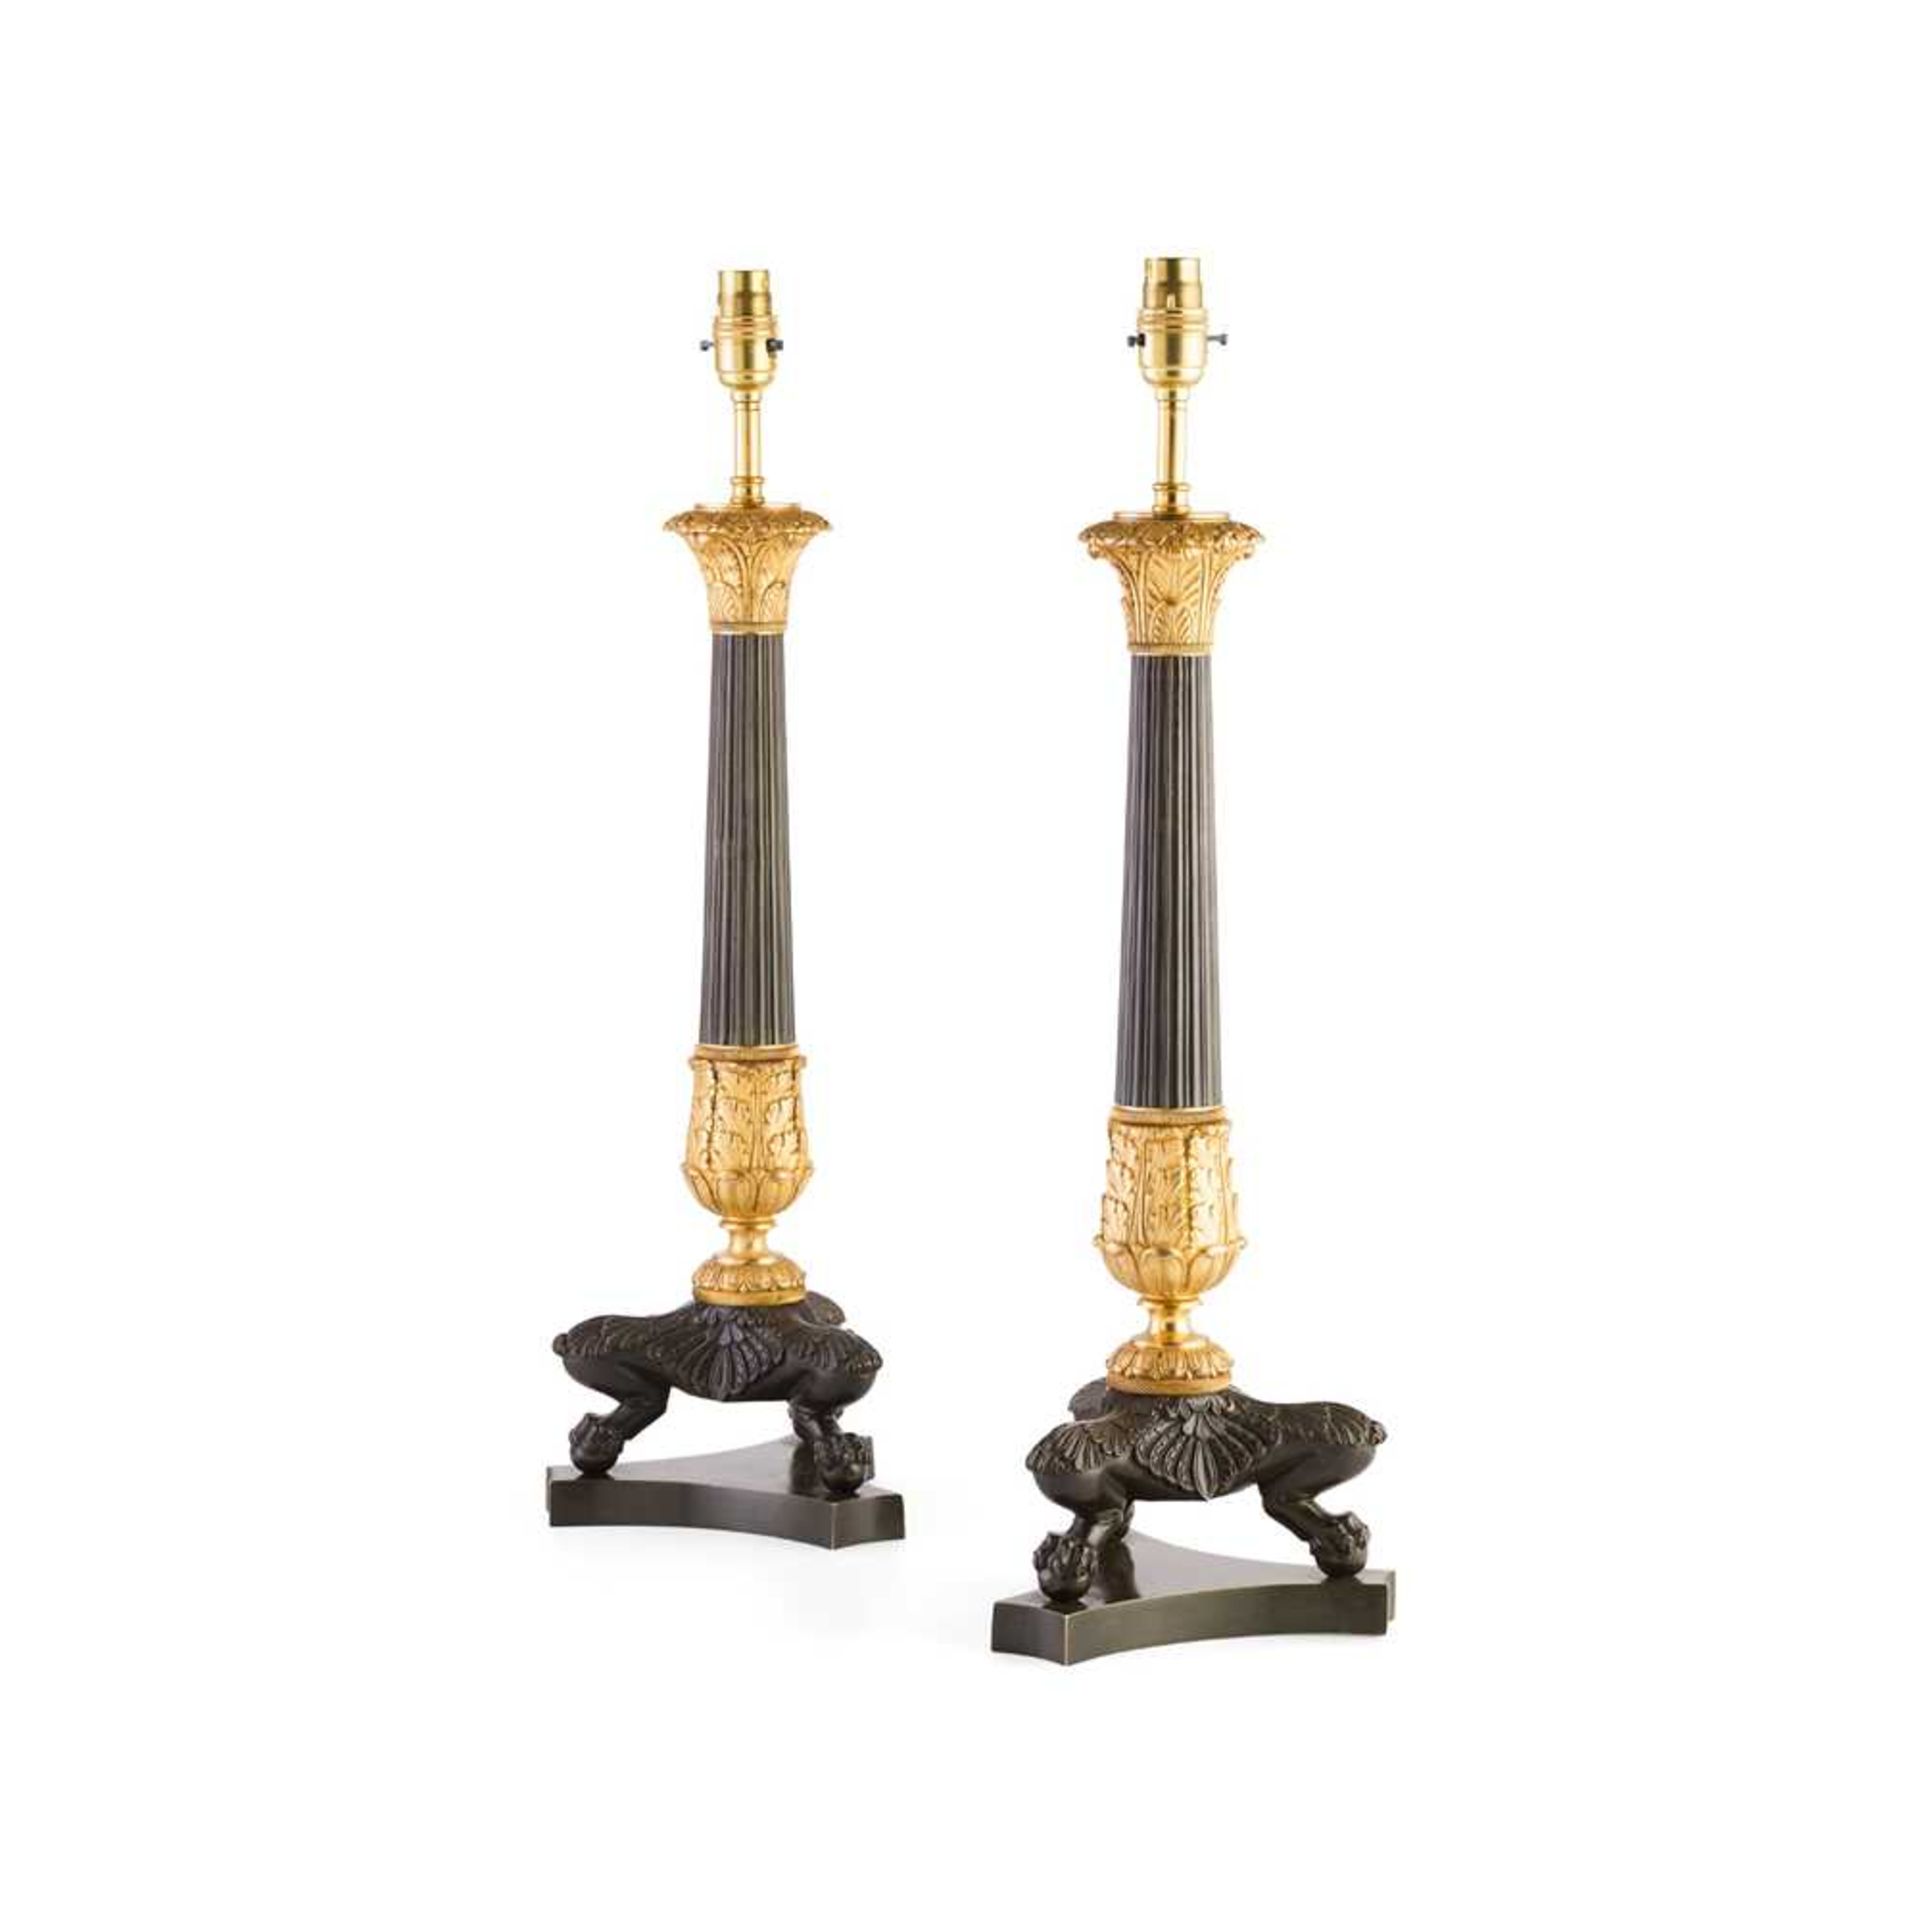 PAIR OF LARGE REGENCY PATINATED AND GILT BRONZE LAMPS EARLY 19TH CENTURY - Image 2 of 2